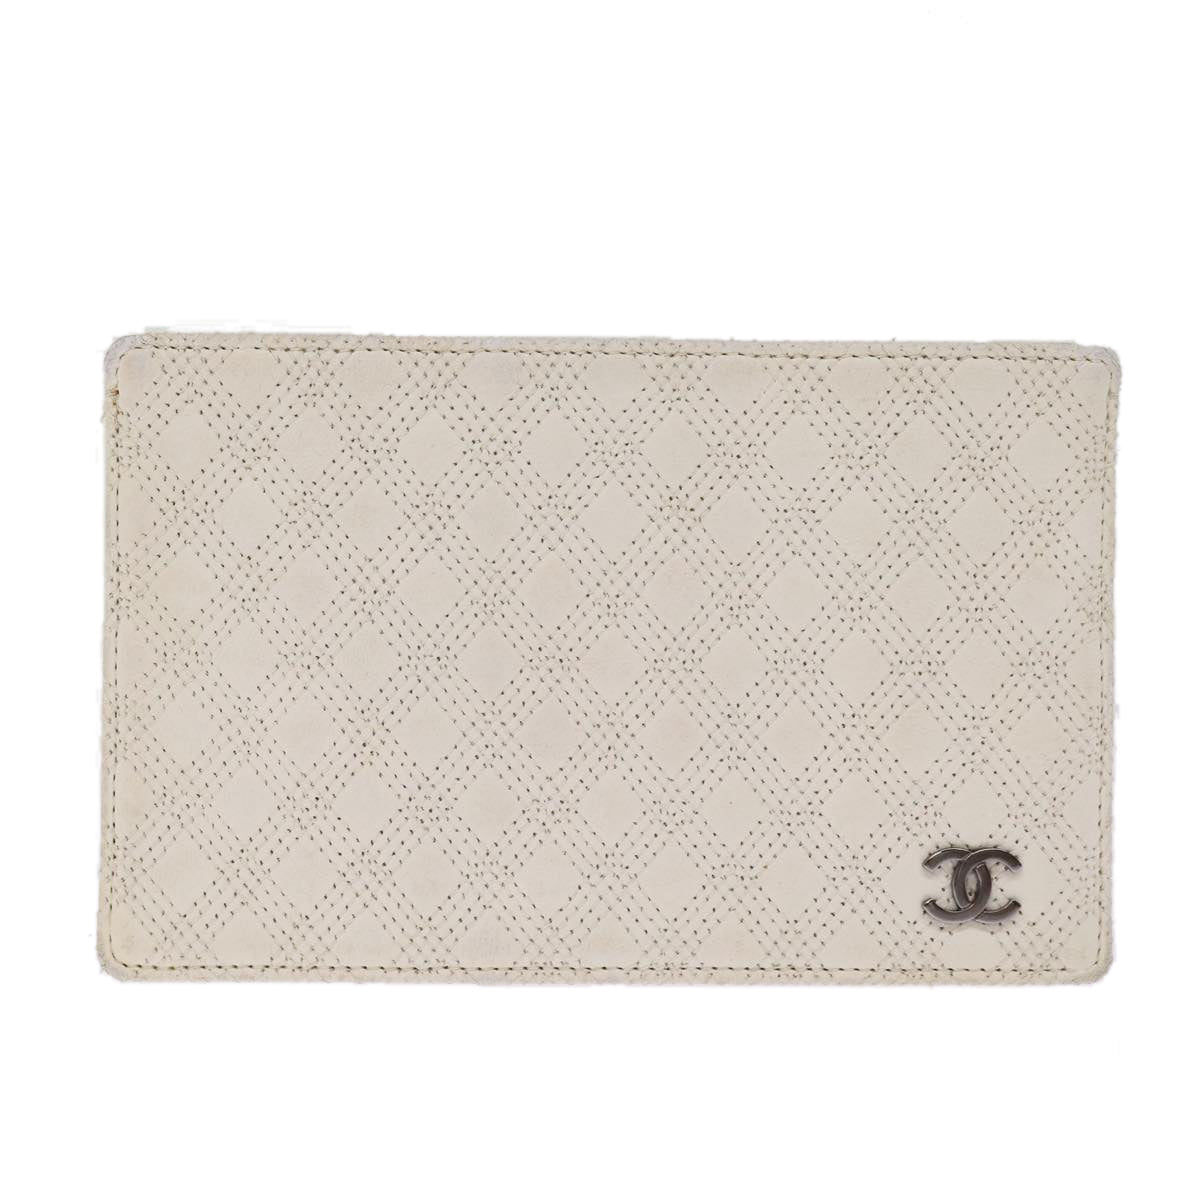 CHANEL Matelasse Pass Case Leather White CC Auth bs14237 - 0